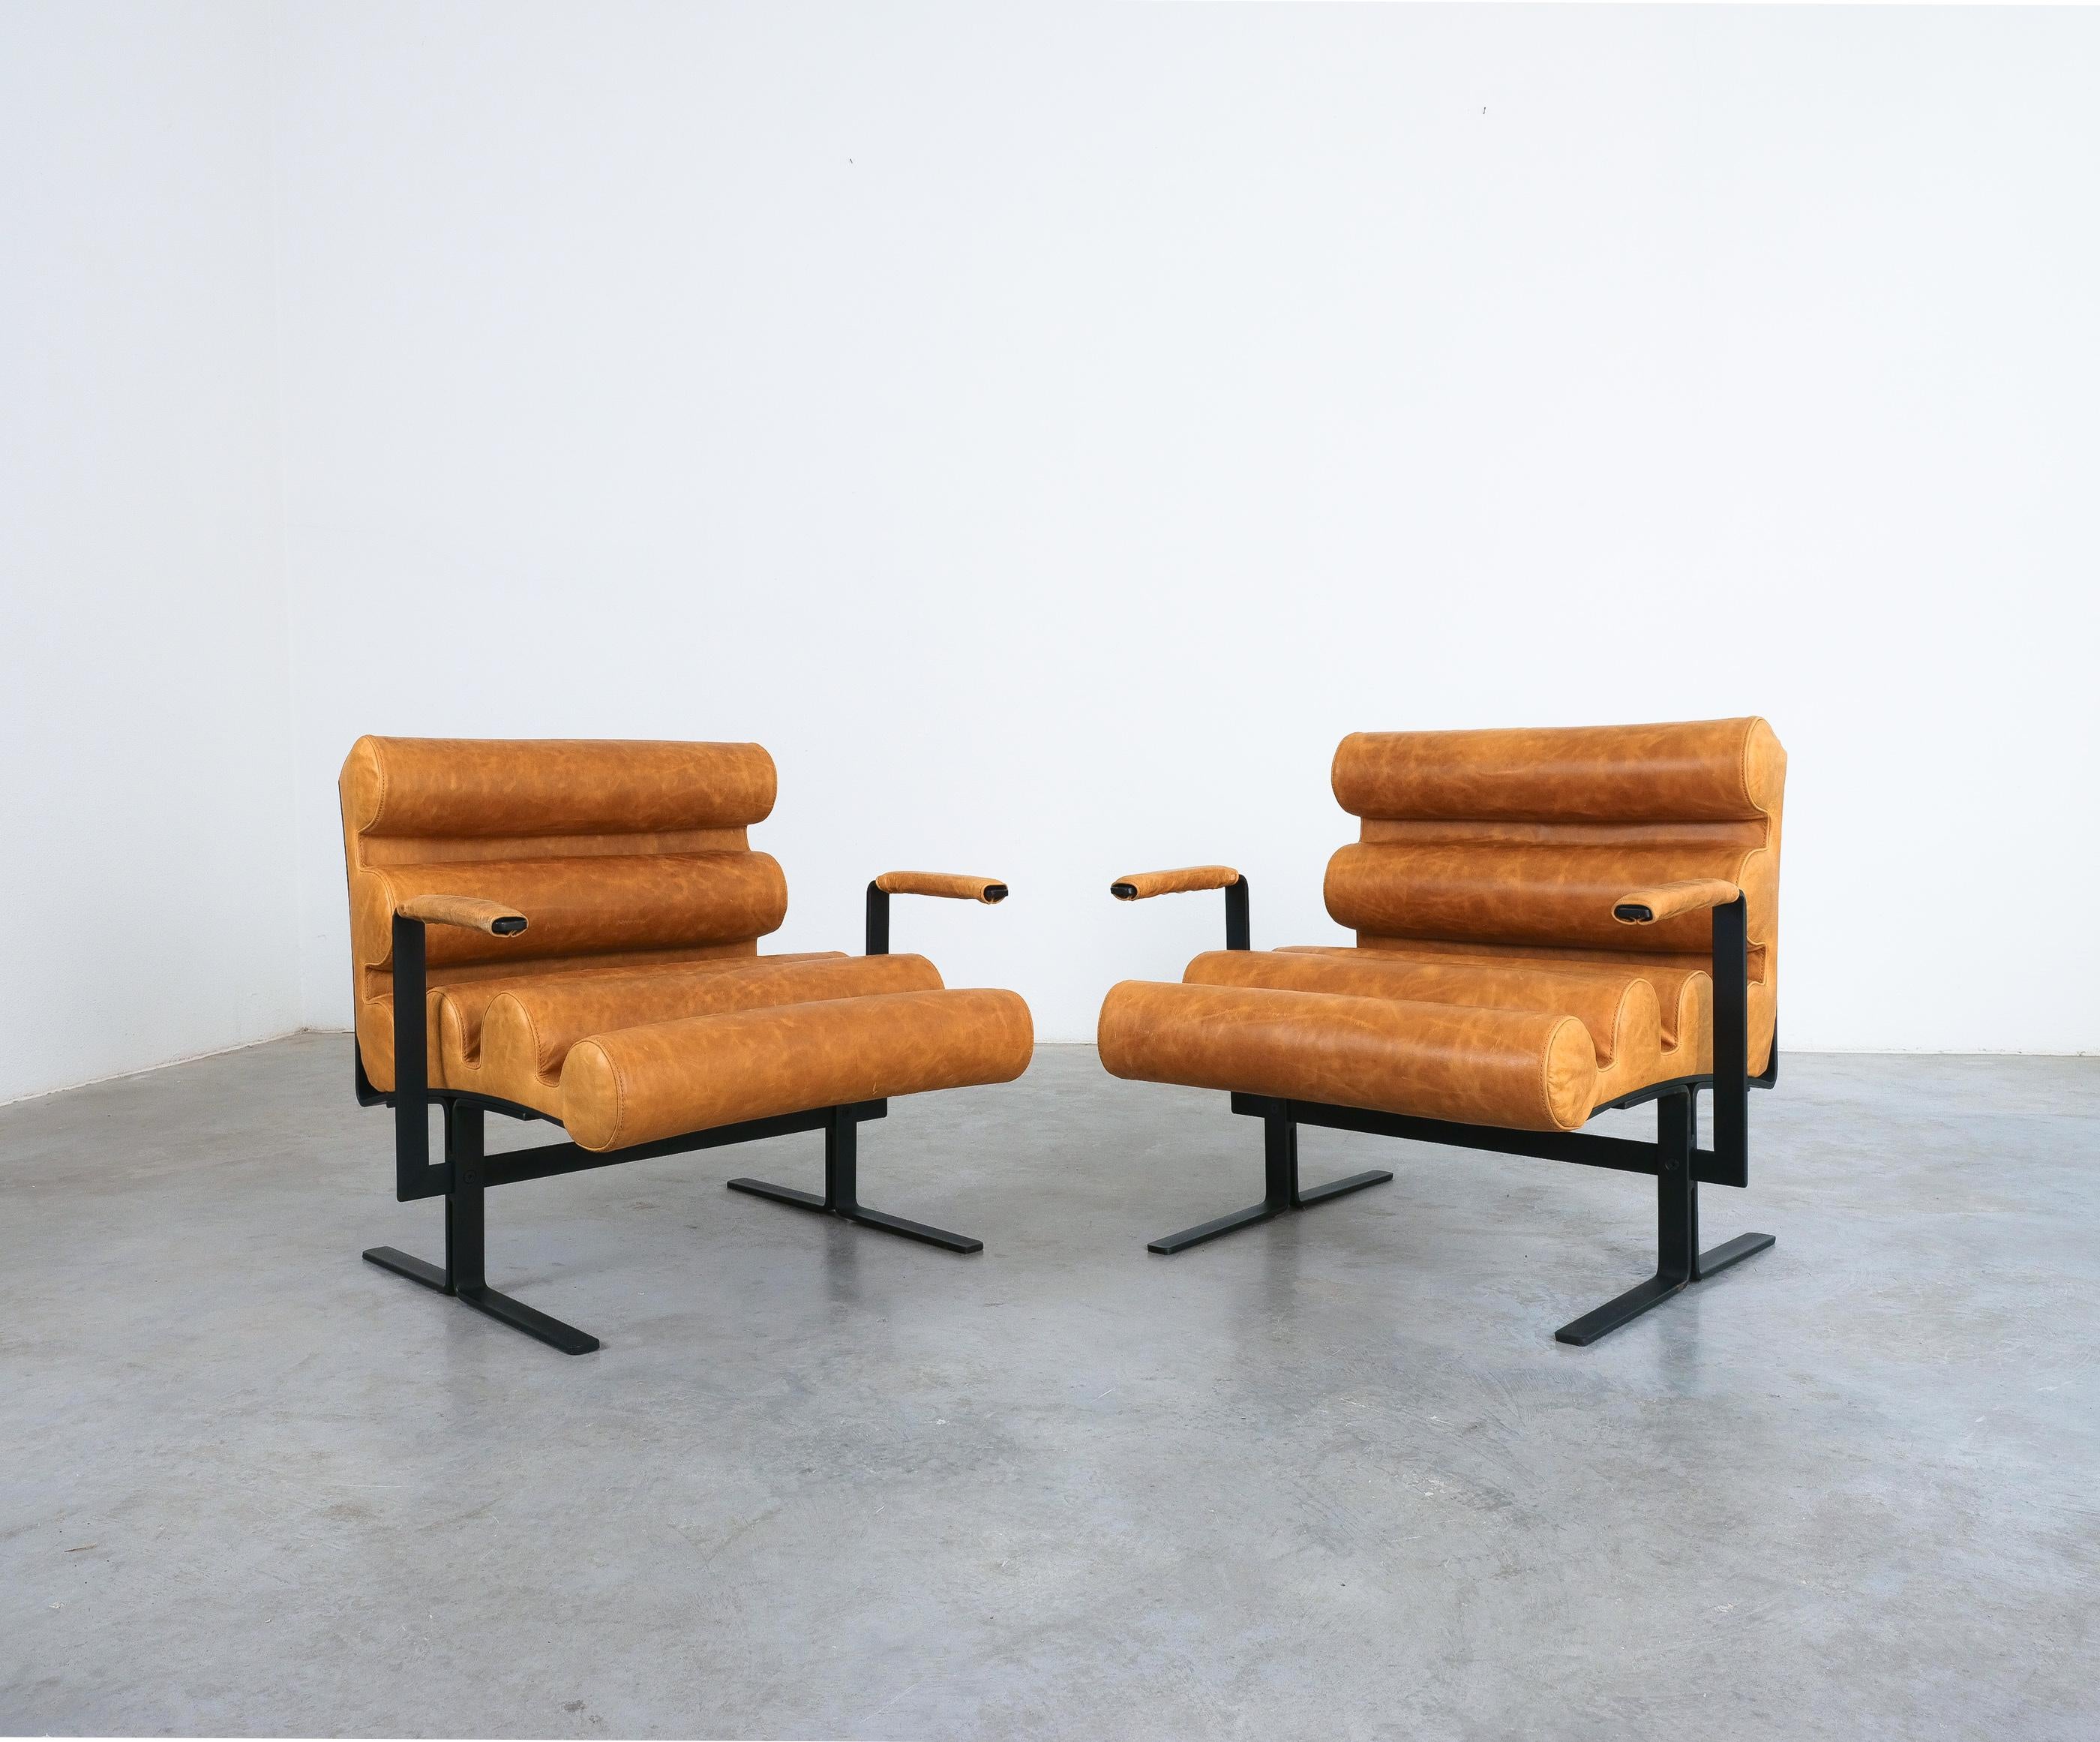 Joe Colombo For Sormani Roll Brown Leather Spring Steel Armchair Pair (2) , 1962 In Good Condition For Sale In Vienna, AT